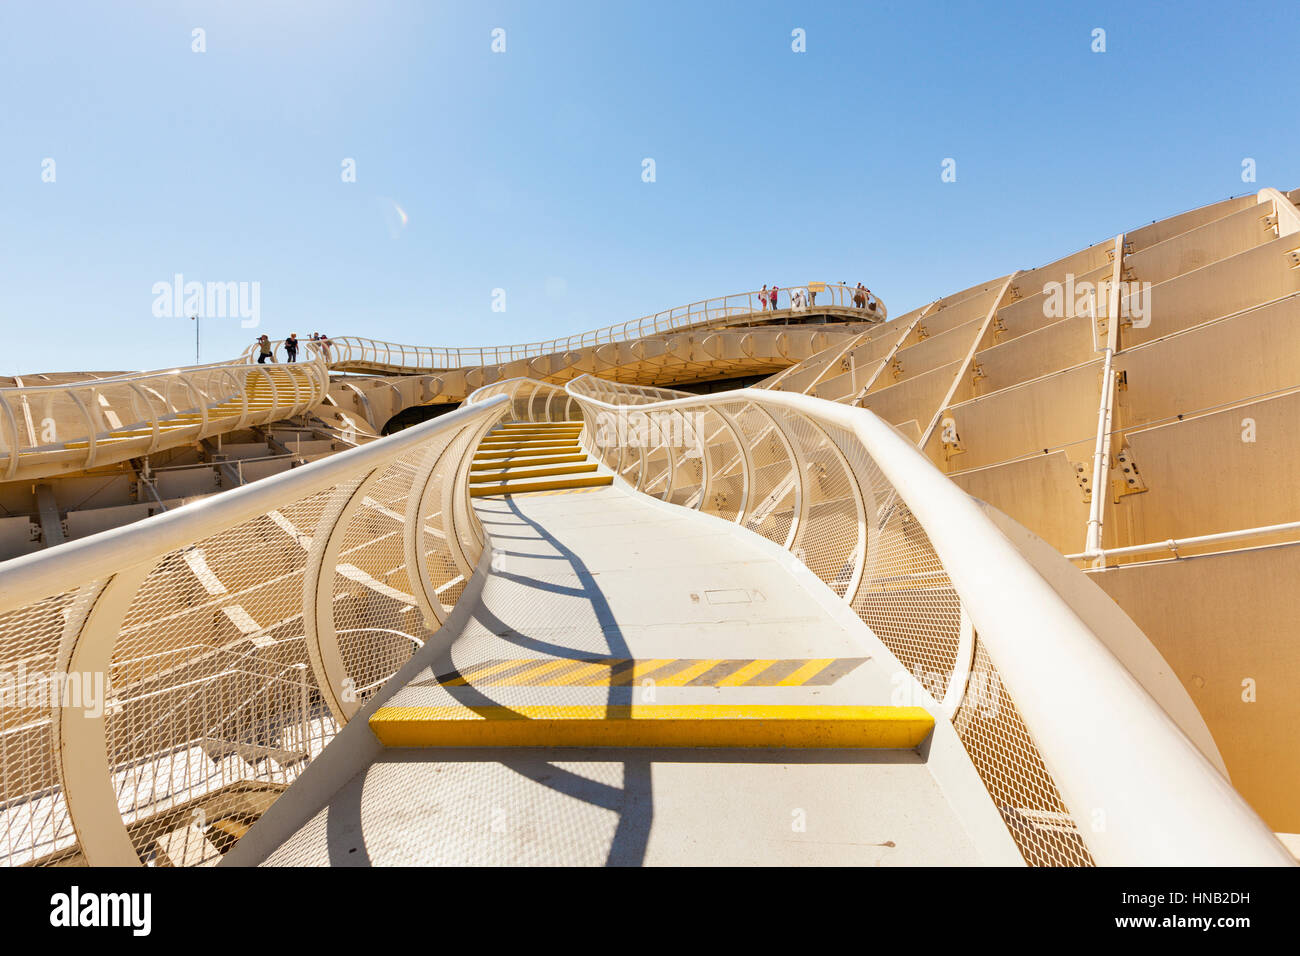 Seville, Spain - May 1, 2016: In bright sunlight people are looking out from the highest point of Metropol Parasol Stock Photo